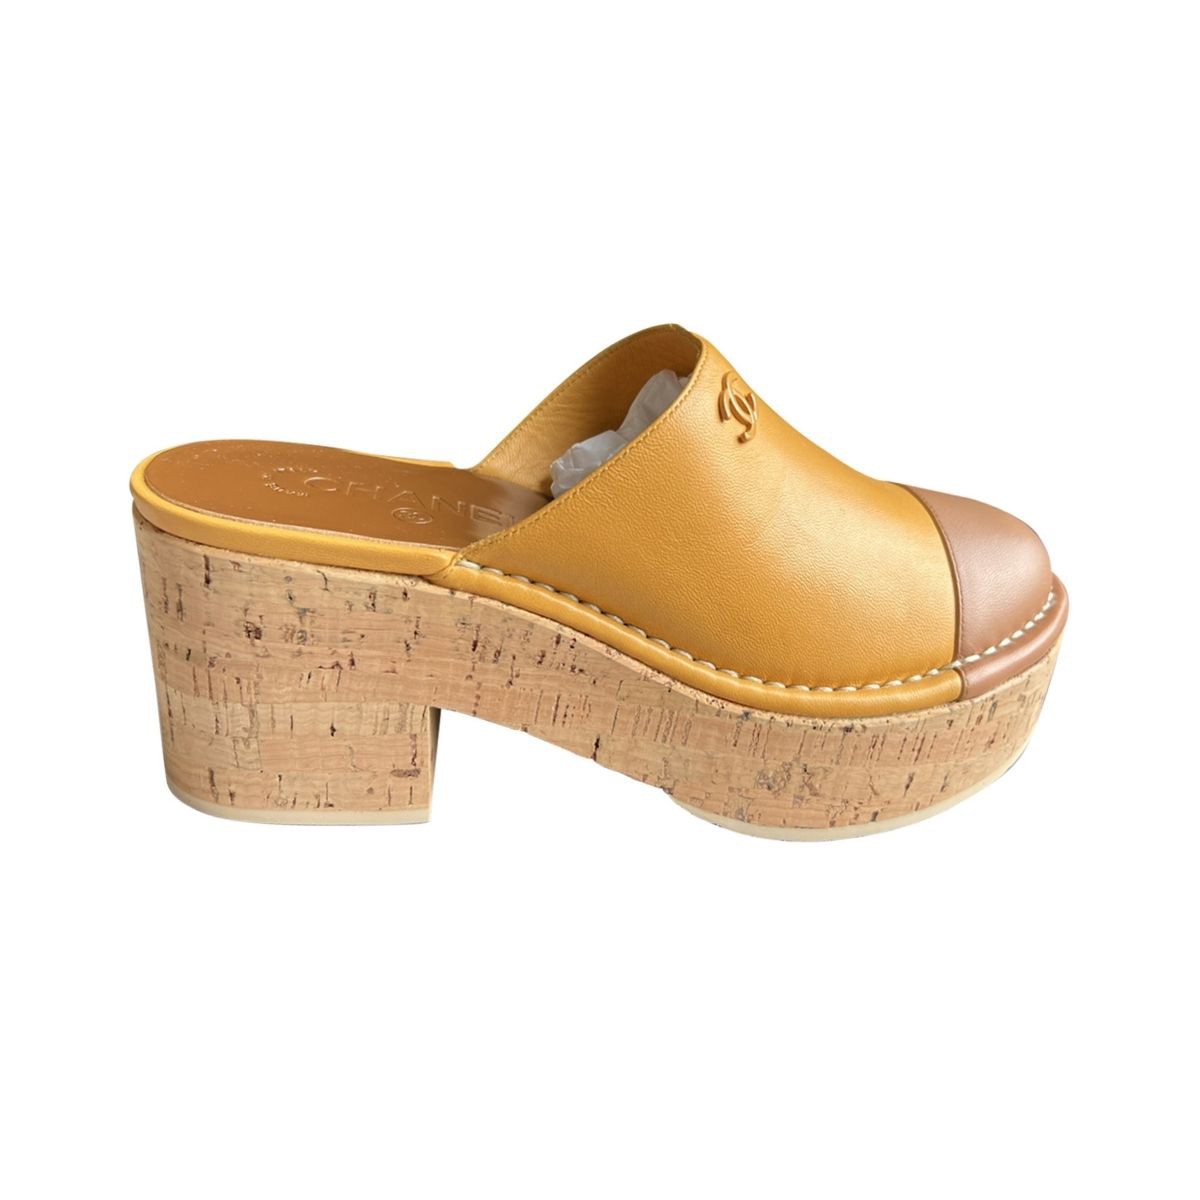 Chanel leather and cork clogs size 38 brand new